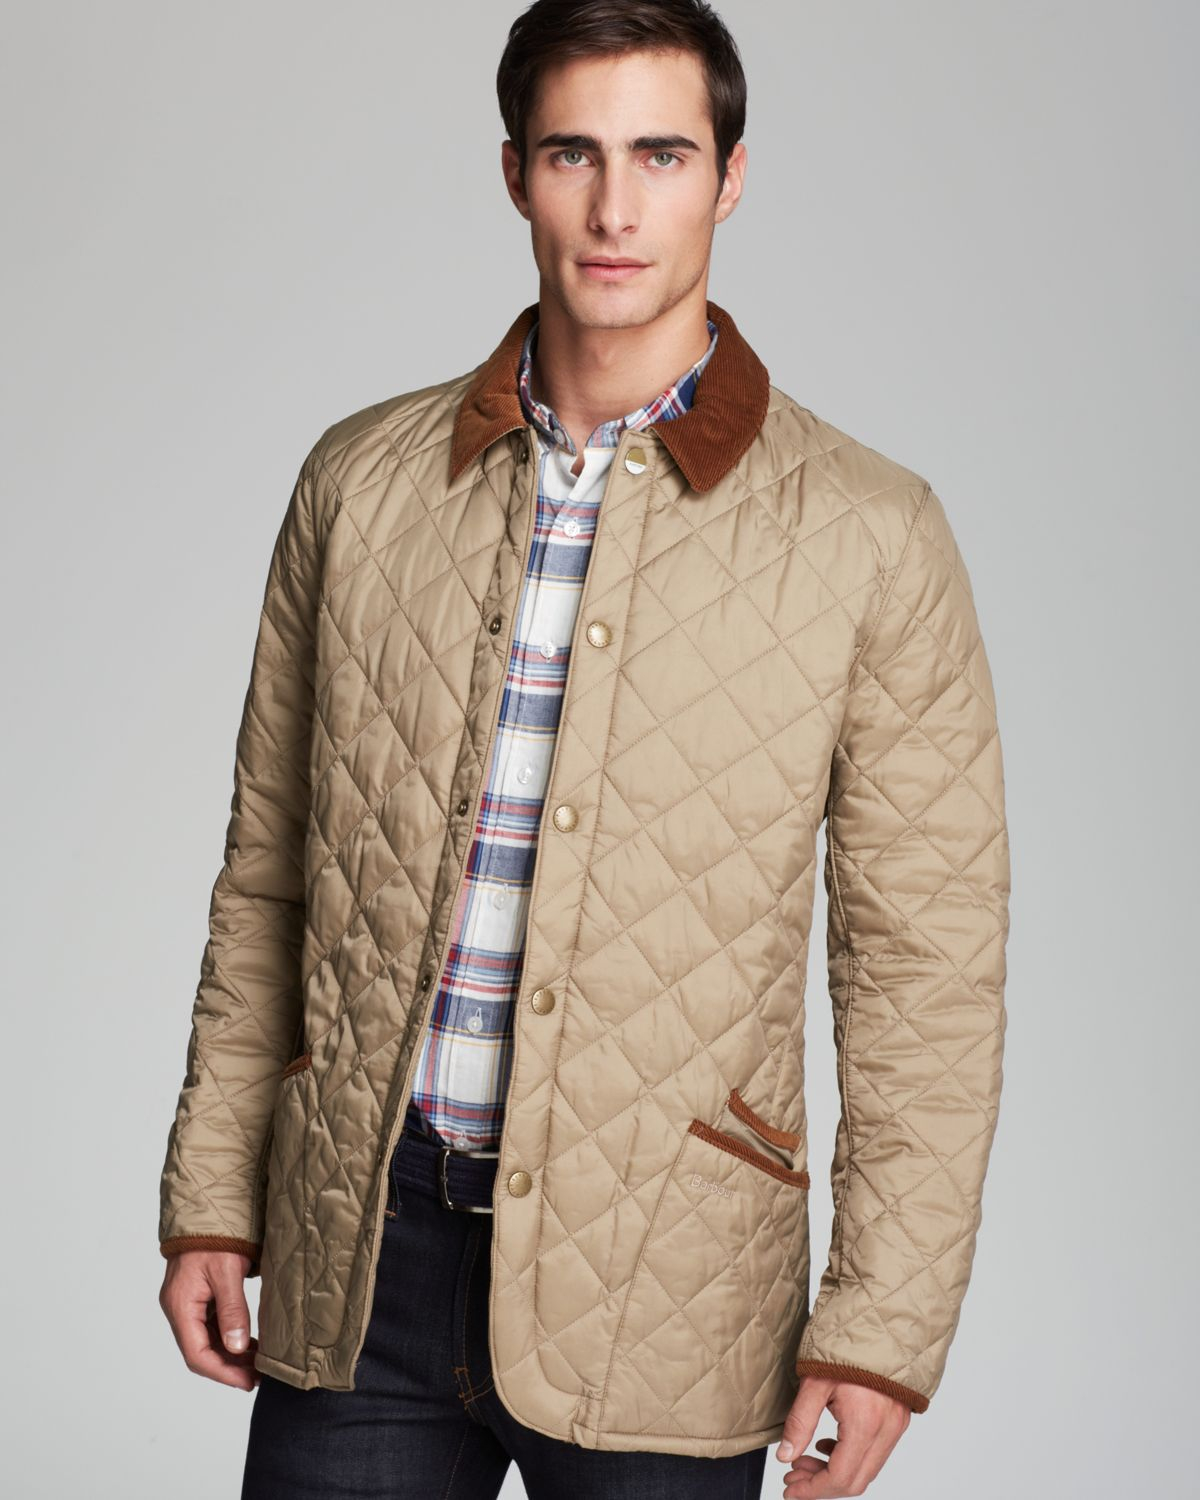 barbour quilted jacket brown, Off 67% ,anilaviralassociates.com